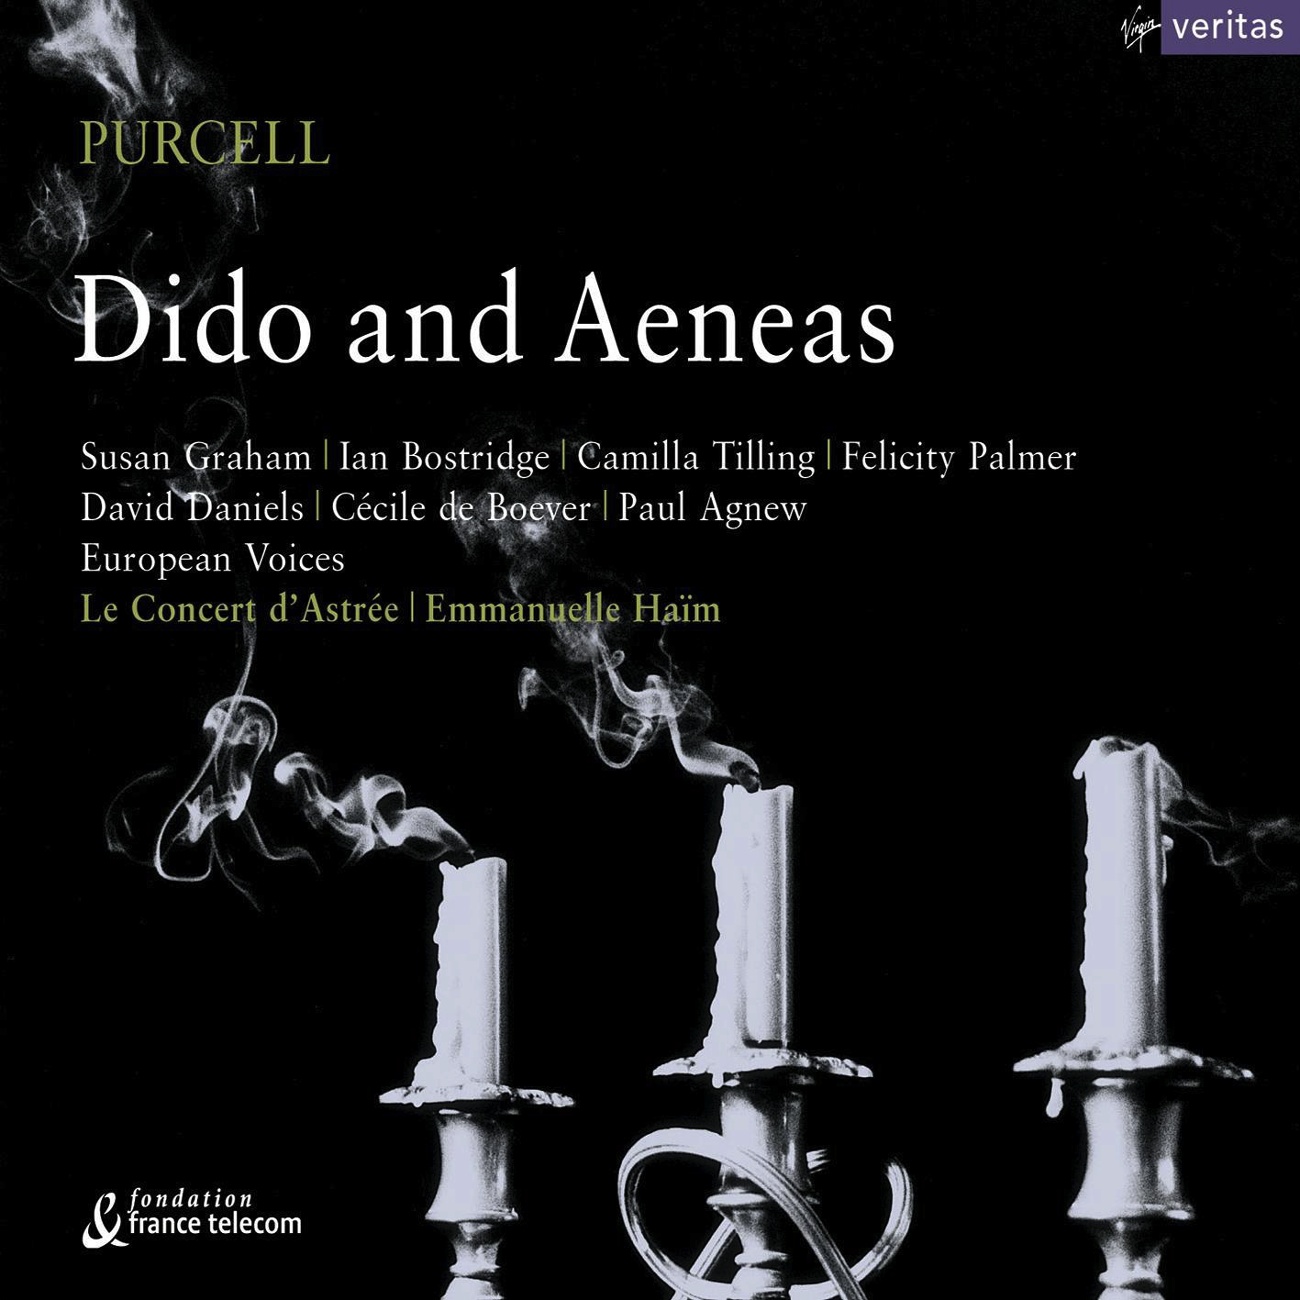 Dido and Aeneas, ACT 1: Scene: The Palast: If not for mine, for Empire's sake (Aeneas-Belinda)